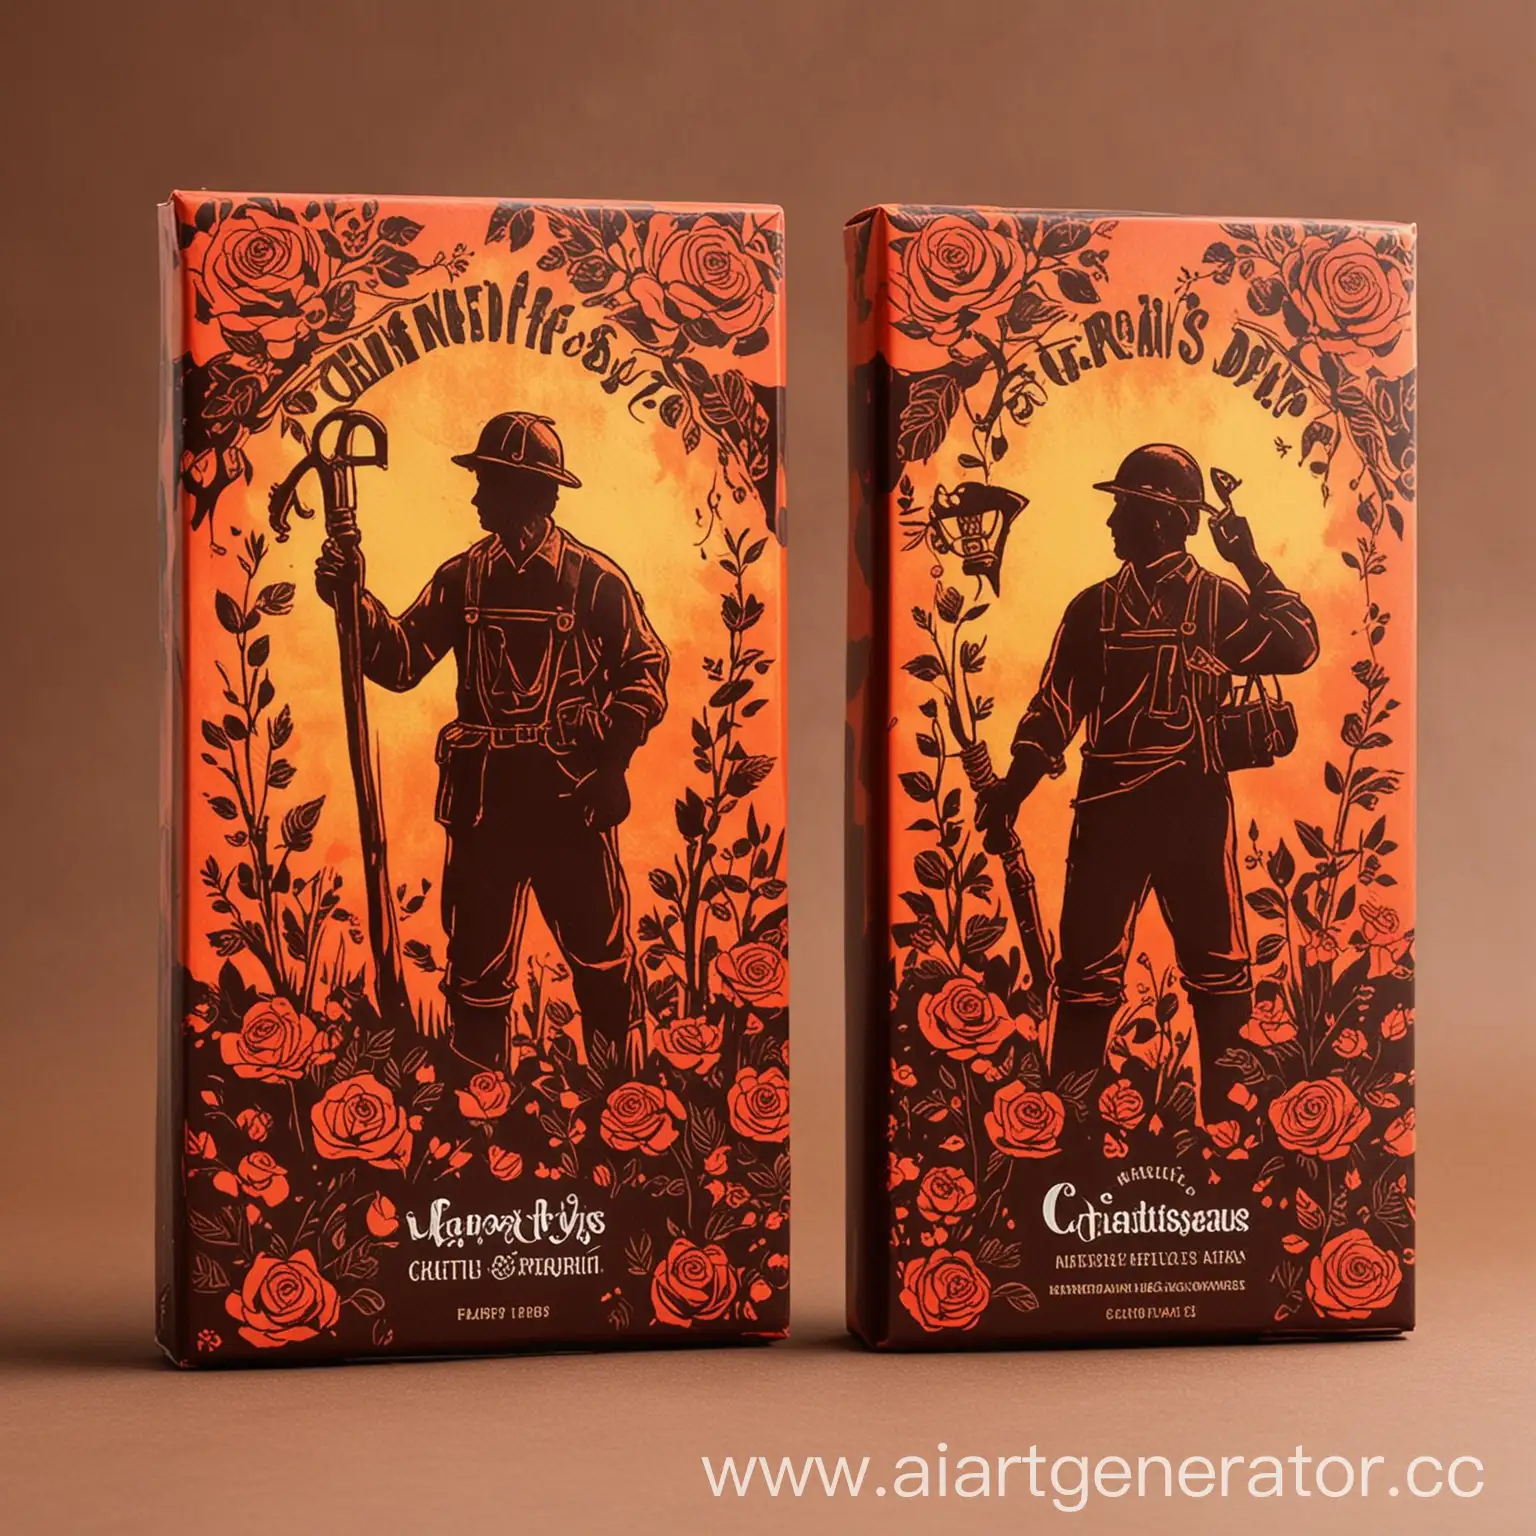 Colorful-Chocolate-Packaging-Design-Featuring-Miner-Silhouettes-and-Rose-Buds